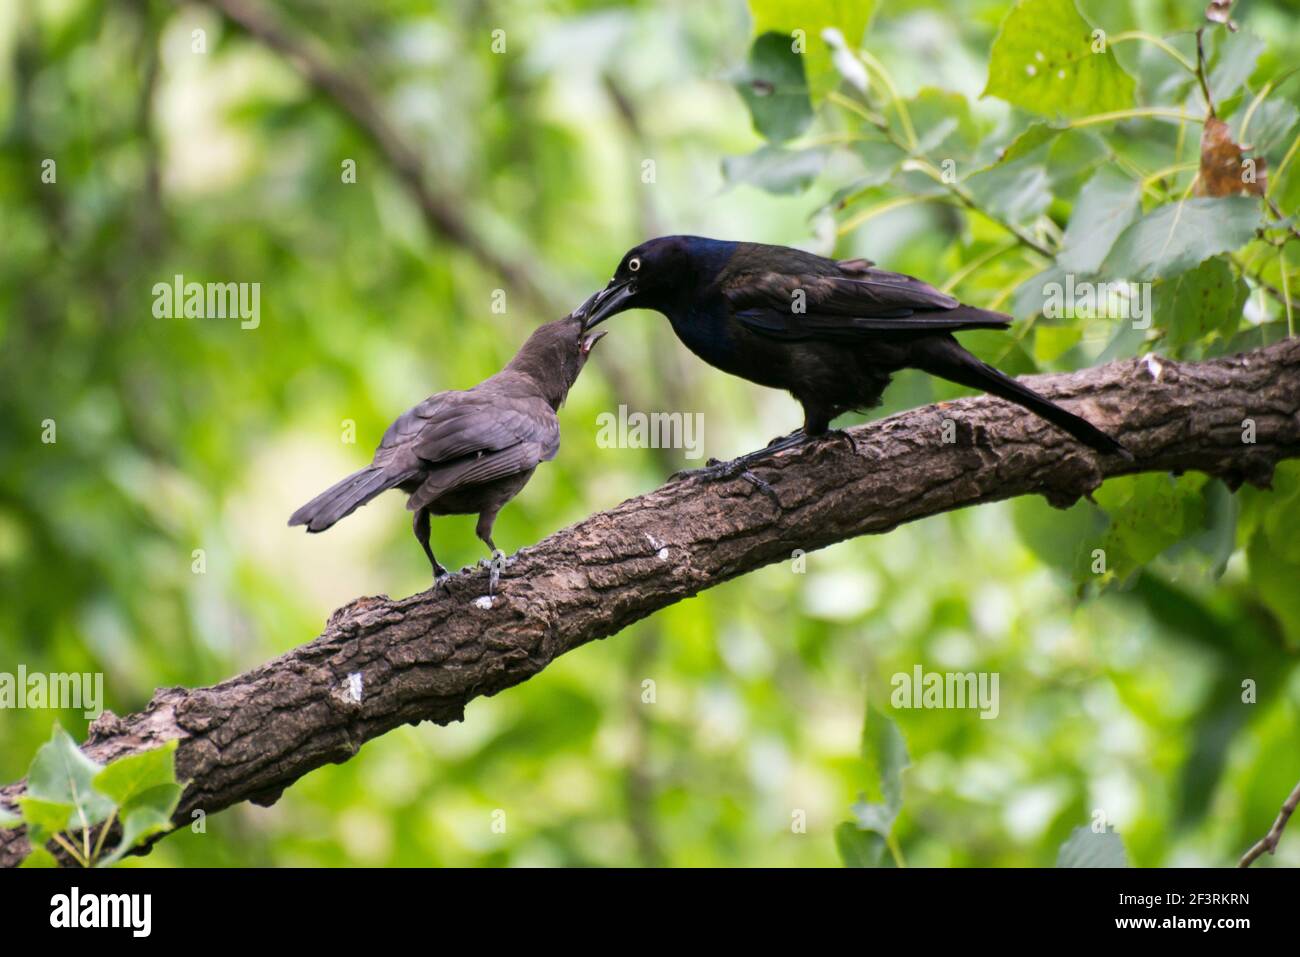 Apple Valley, Minnesota.  Commom Grackle, Quiscalus quiscula feeding the young fledgling on a tree branch. Stock Photo